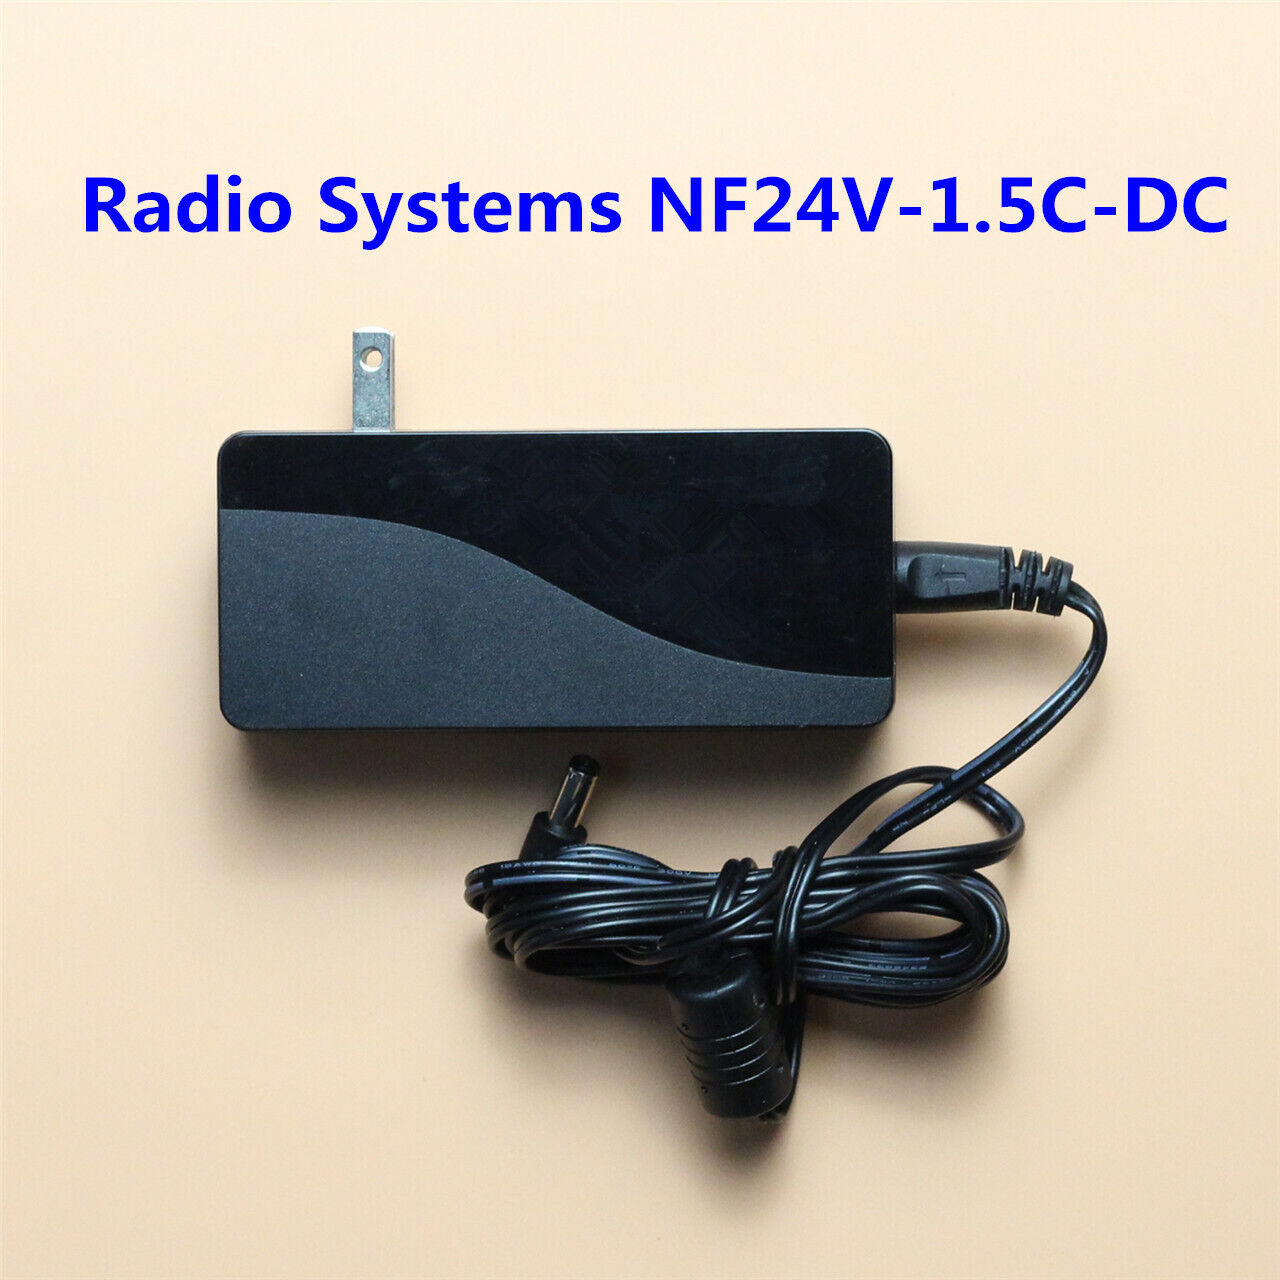 Genuine Radio Systems 650-627 AC Adapter Power Supply PetSafe NF24V-1.5C-DC paymen